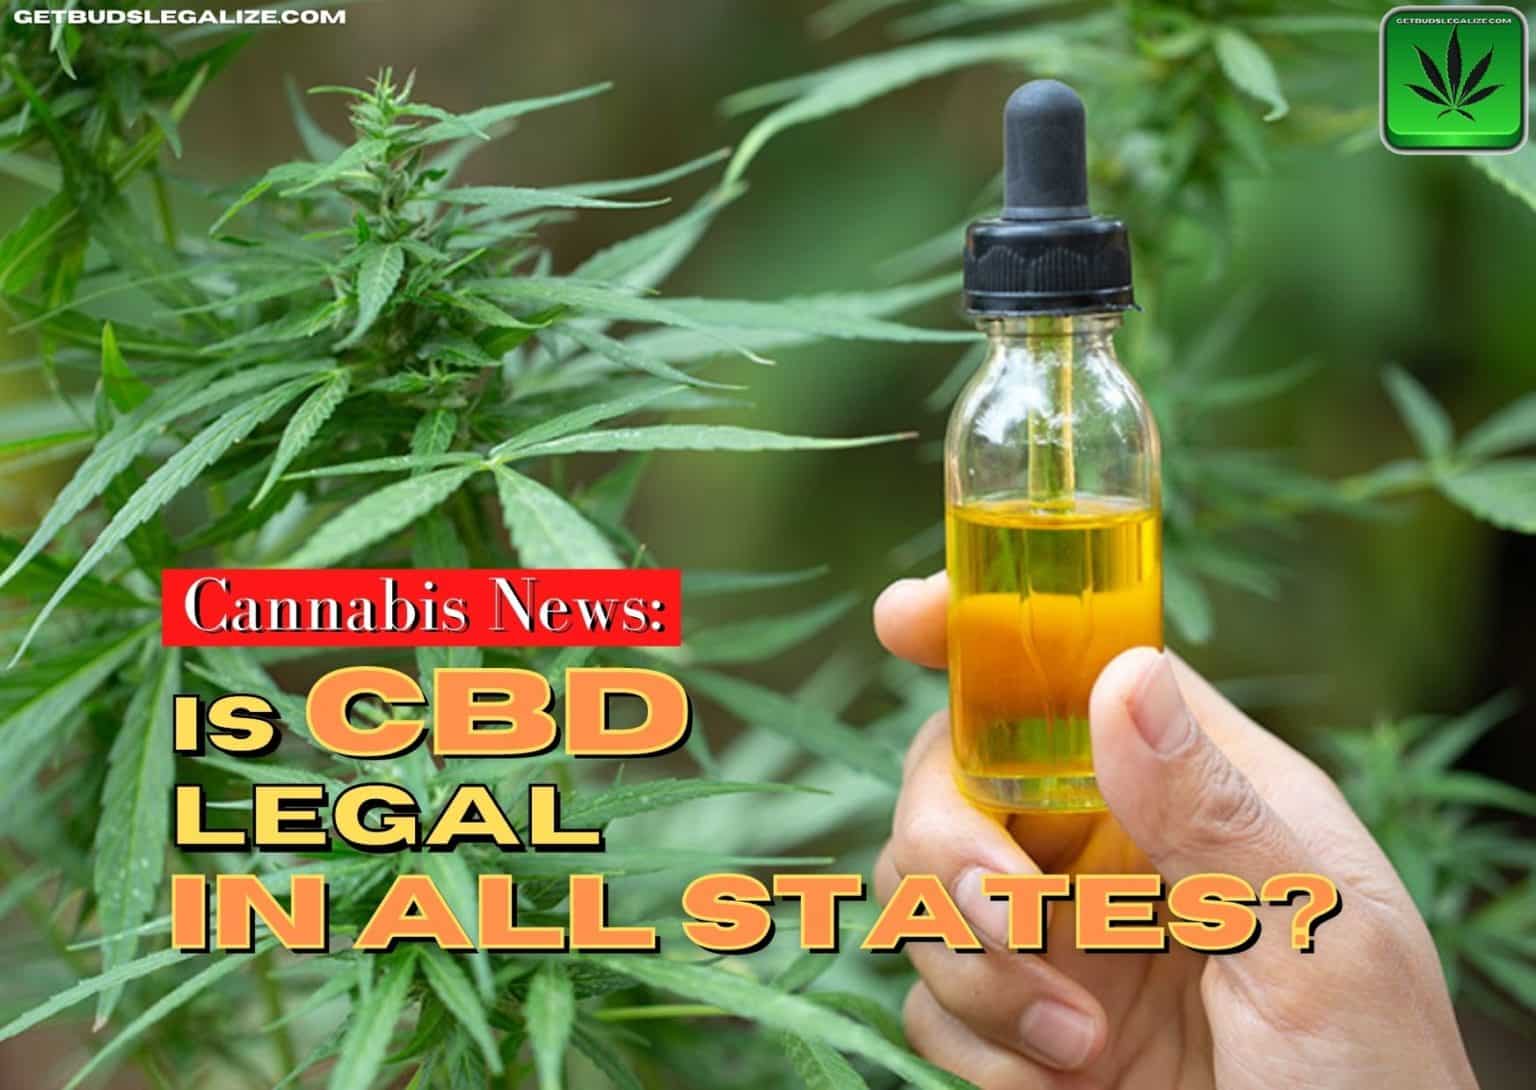 Is CBD legal in all states?